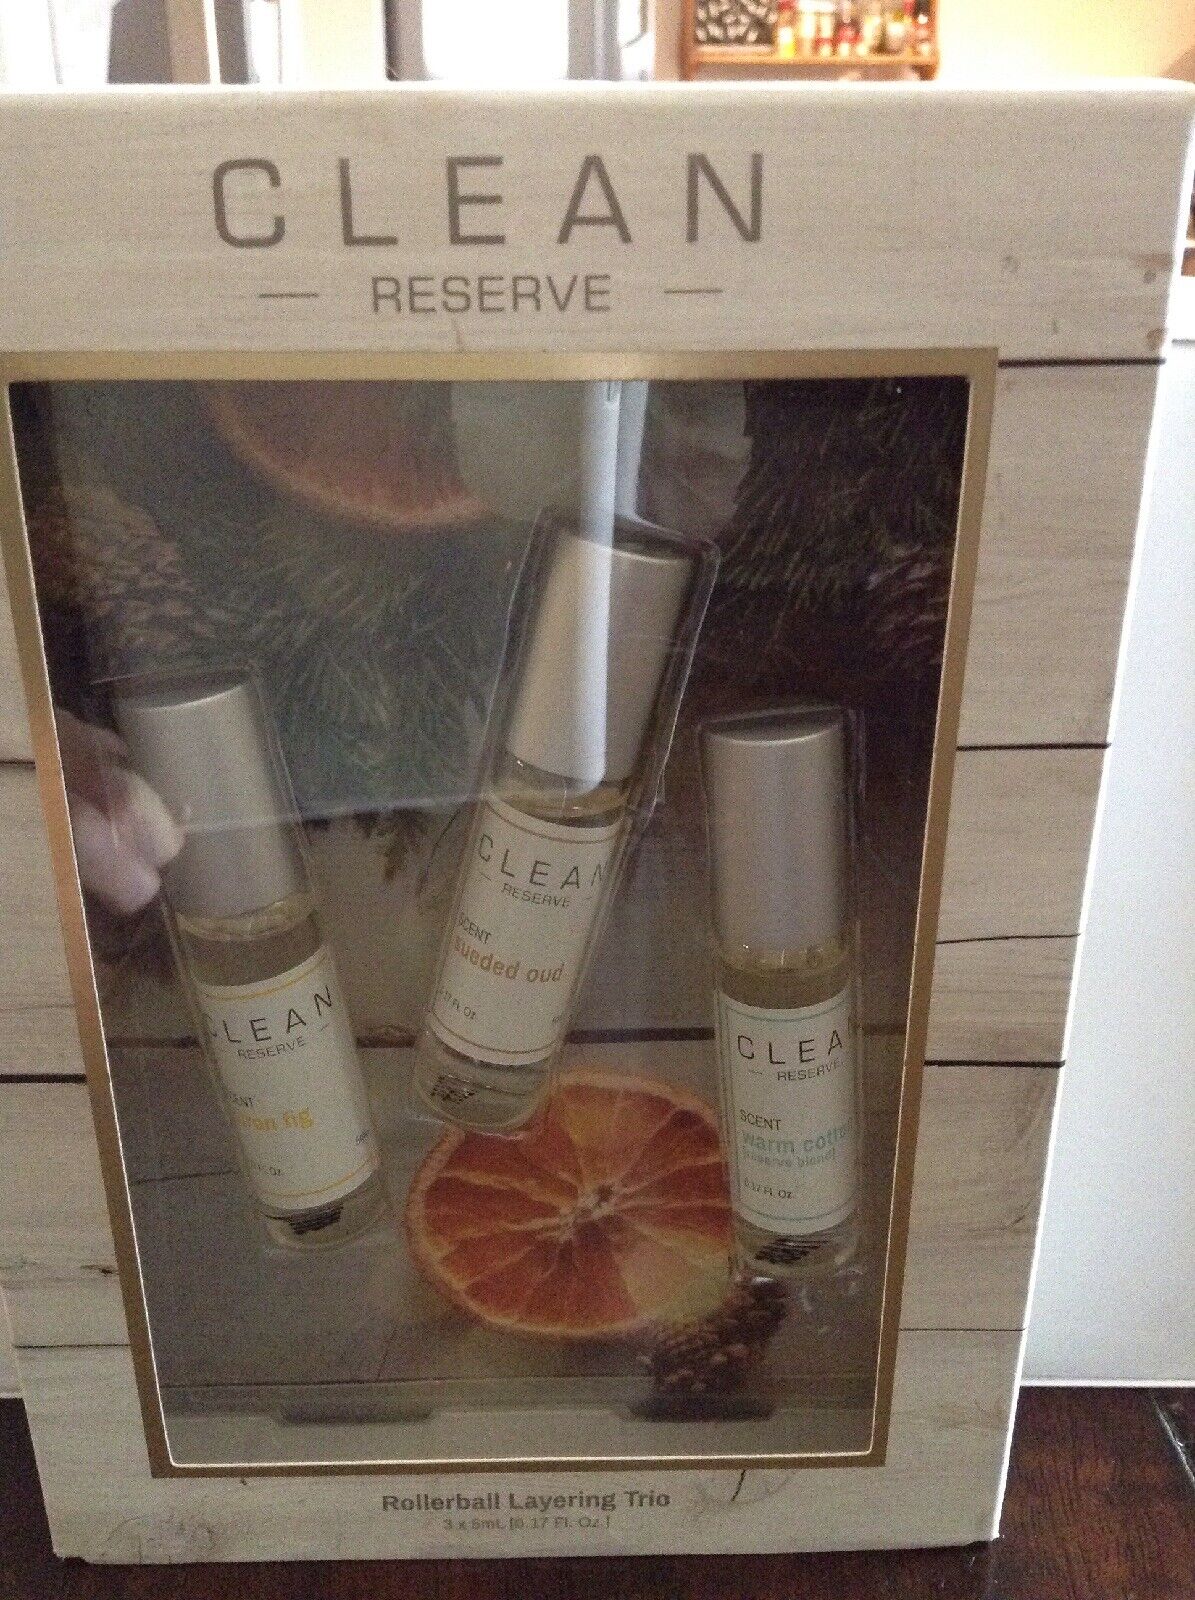 4 years warranty Clean Selling and selling Reserve Rollerball Layering Trio cotton citrus Warm 3X5ml